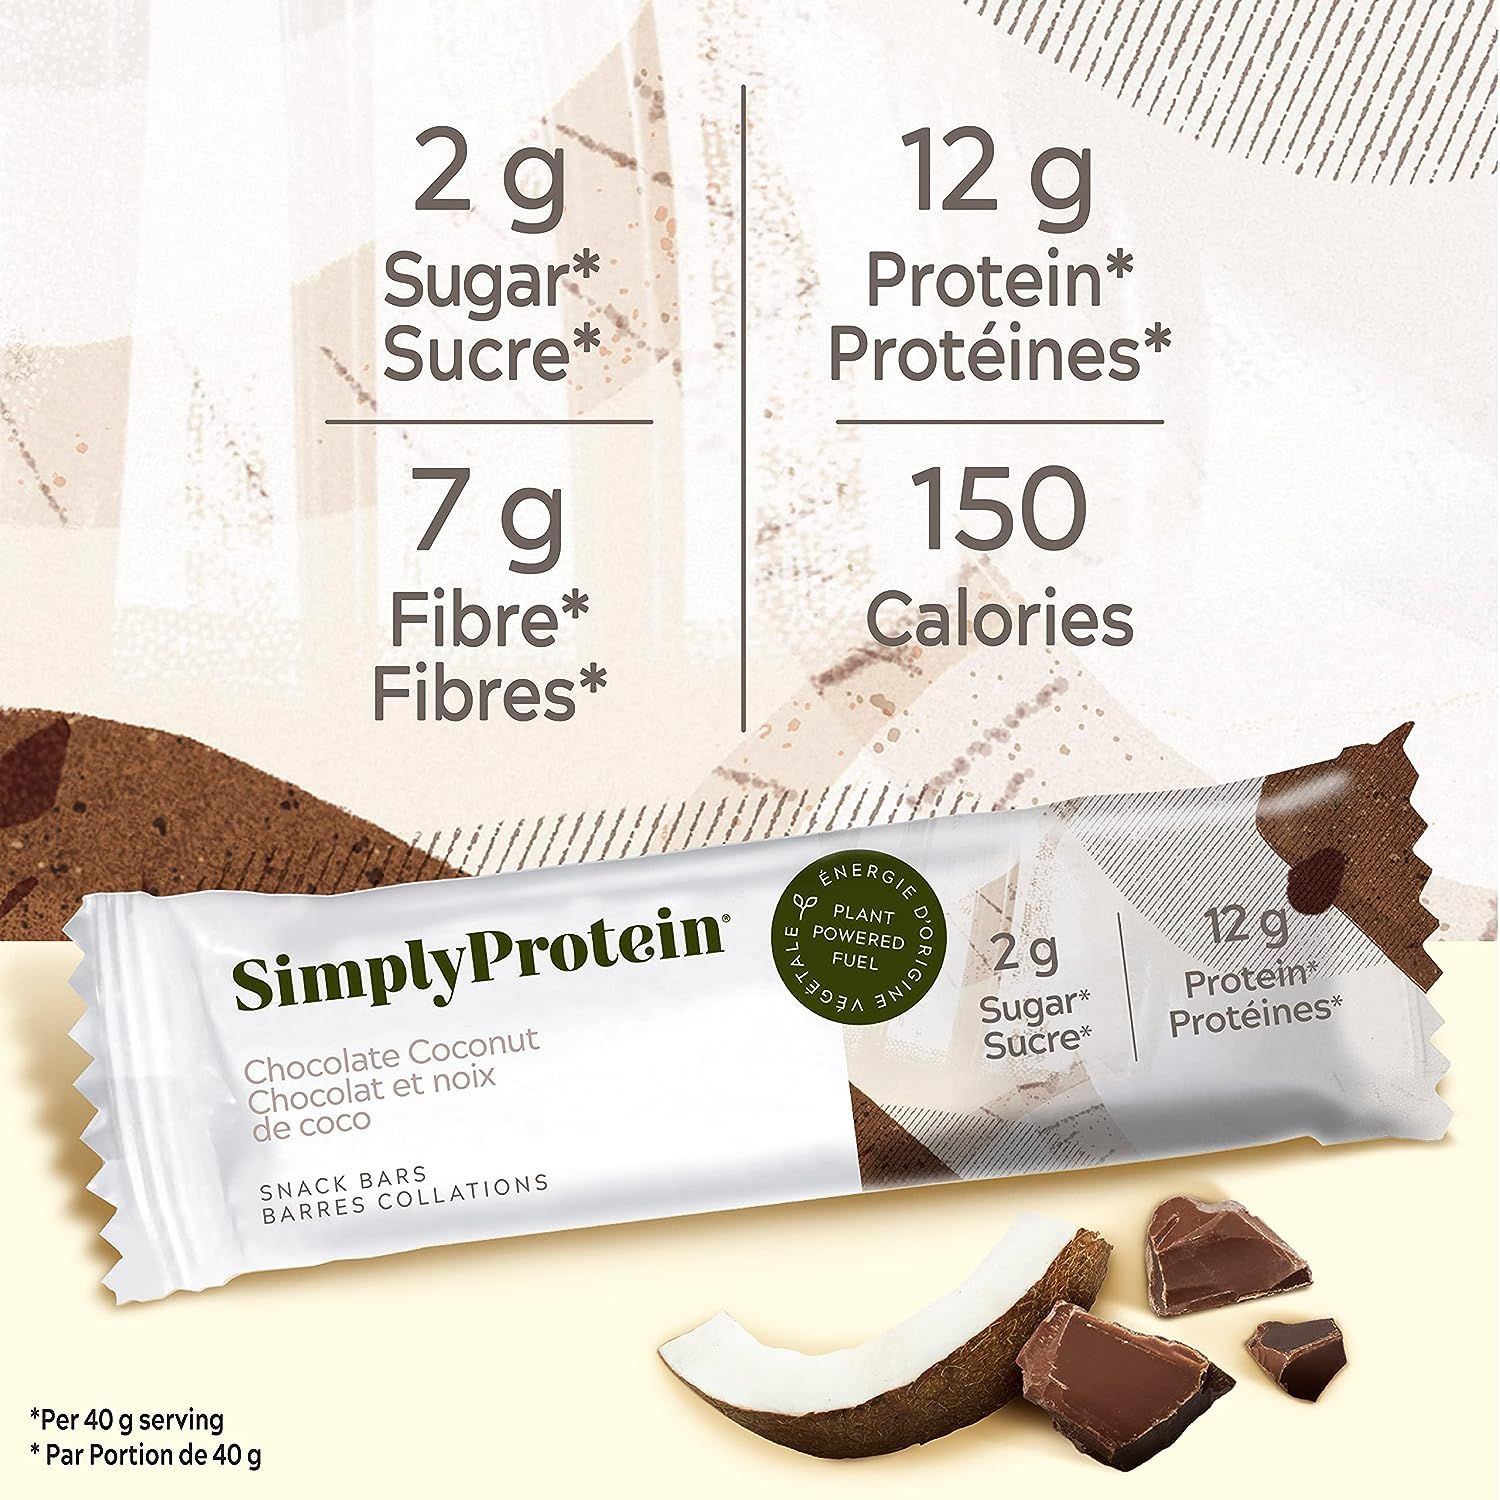 SimplyProtein Protein Snack Bar (1 bar) Protein Snacks Chocolate Coconut SimplyProtein